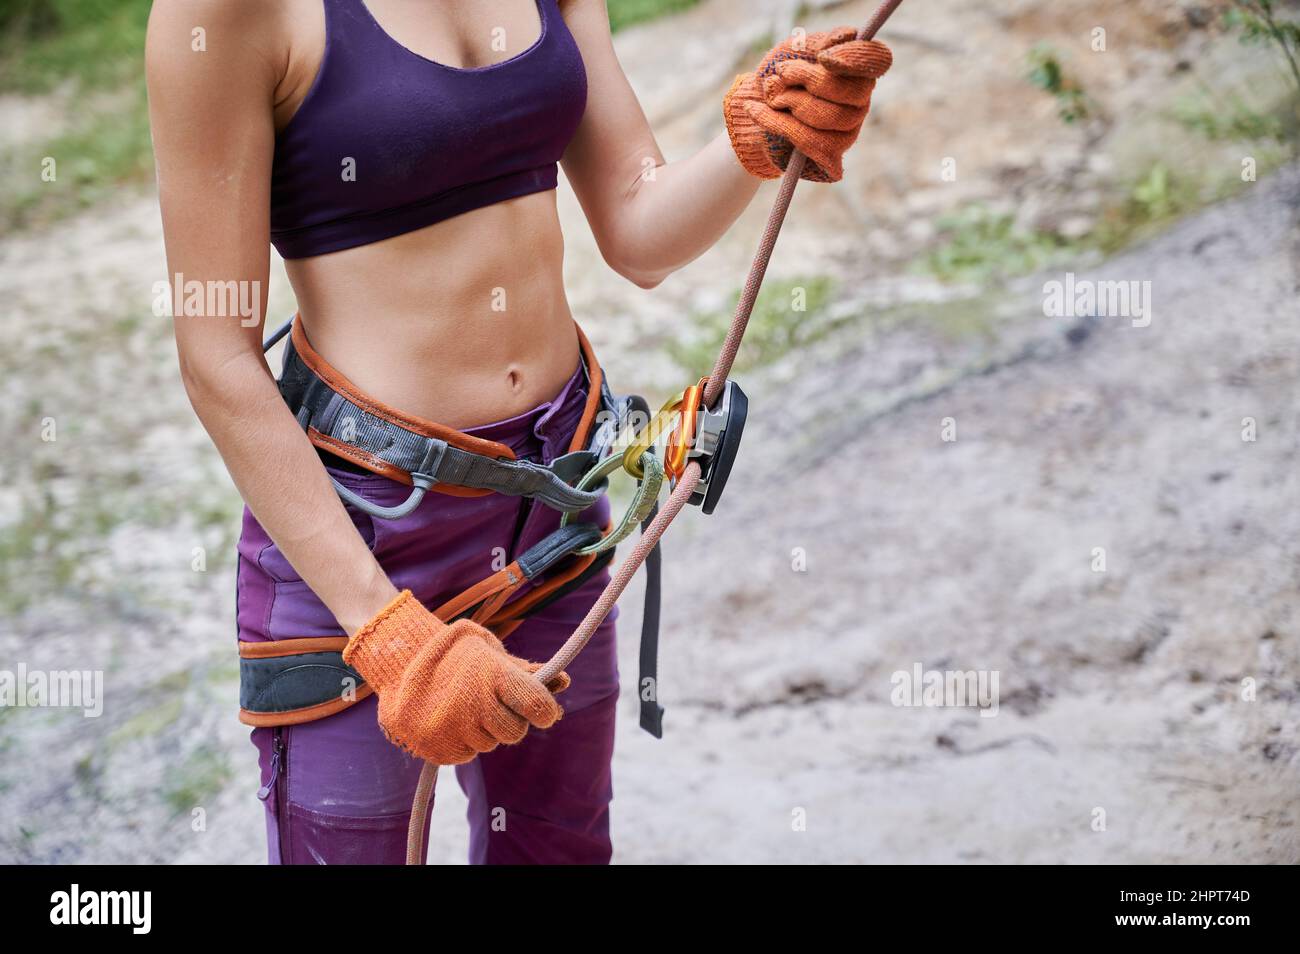 Close up of young female climber belaying leader during rock climbing outdoors, using rope, grigri, carabines and gloves. Concept of teamwork, trust, extreme sport and outdoor activity. Stock Photo